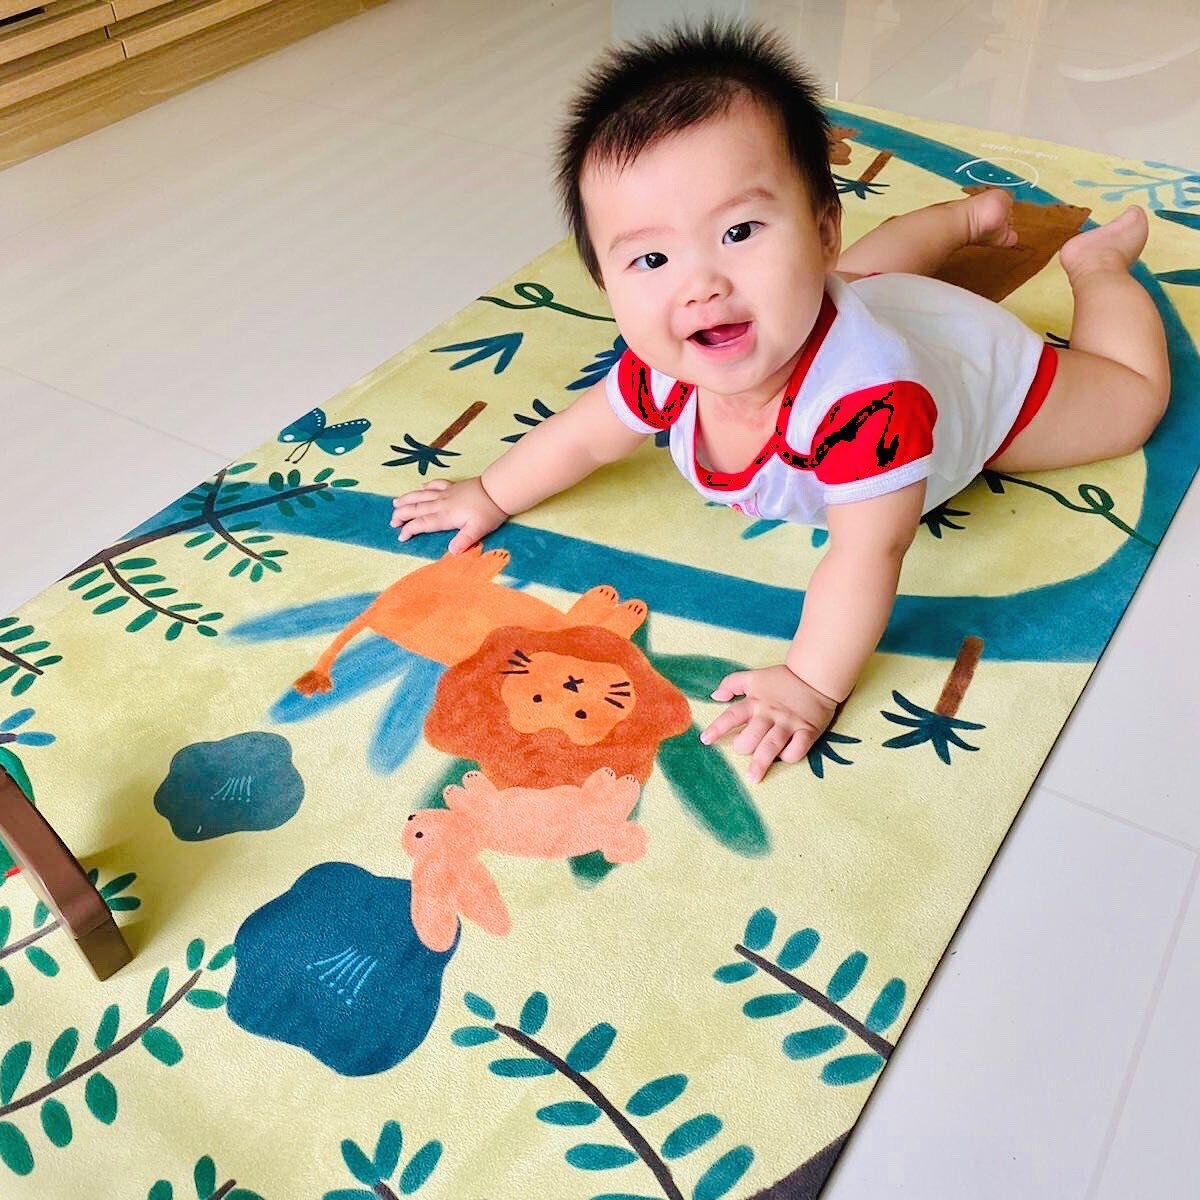 Look ma, no sweat pulling myself up for the weekend! ⠀
⠀
One of our customers kindly sent us this to show how her baby boy is trying to crawl ahead using our well-cushioned yoga mat for support. YAY! #babymilestoneunlocked⠀
⠀
It&rsquo;s amazing how b